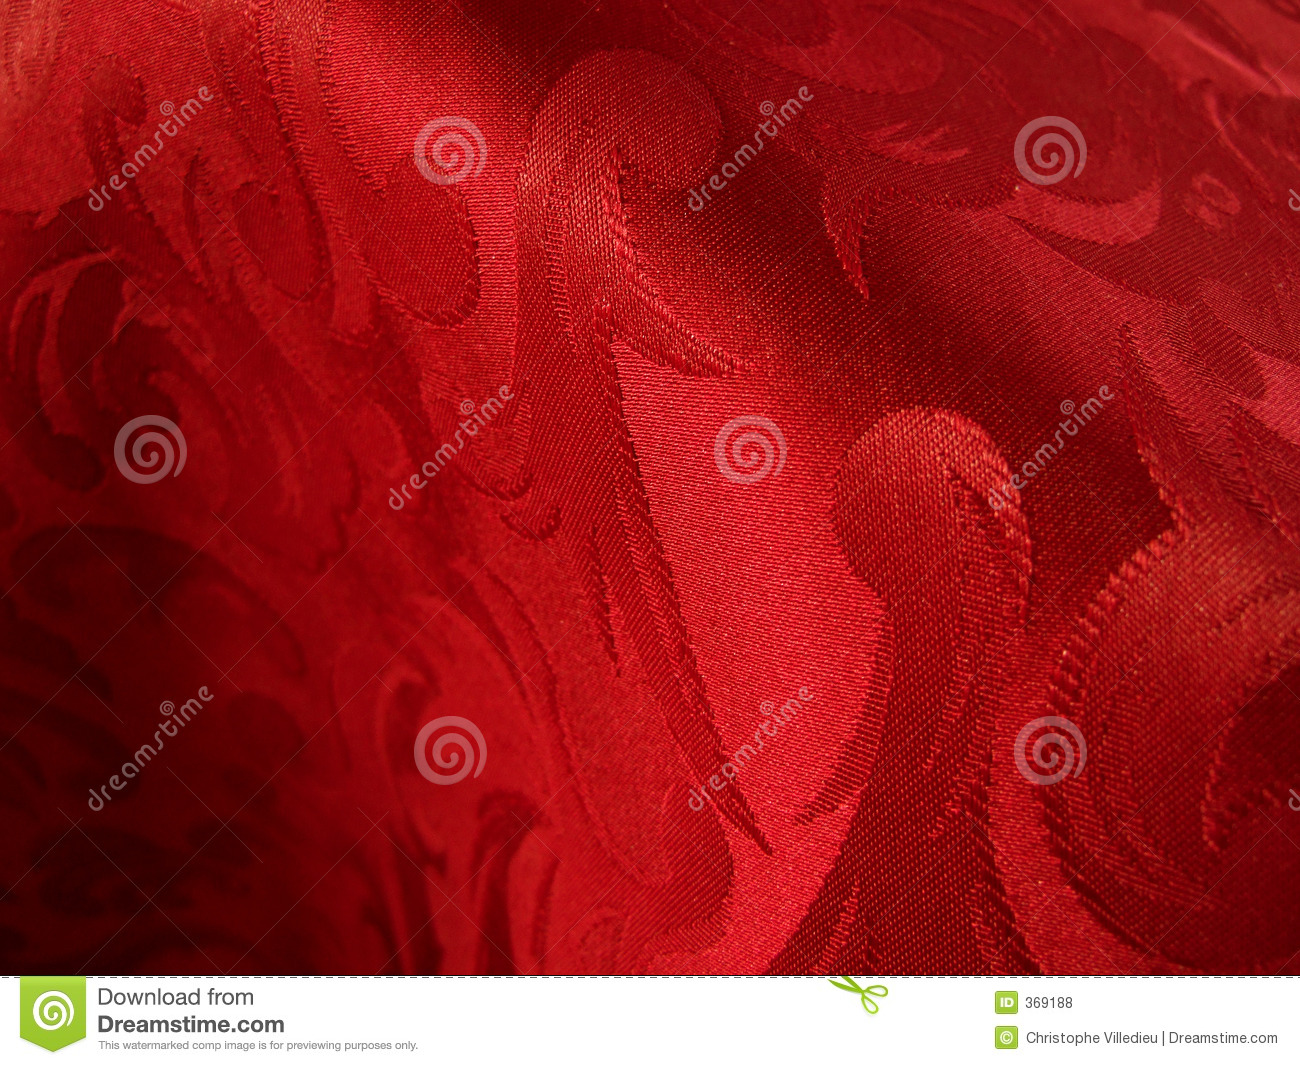 Warm Red Fabric Royalty Free Stock Photos   Image  369188